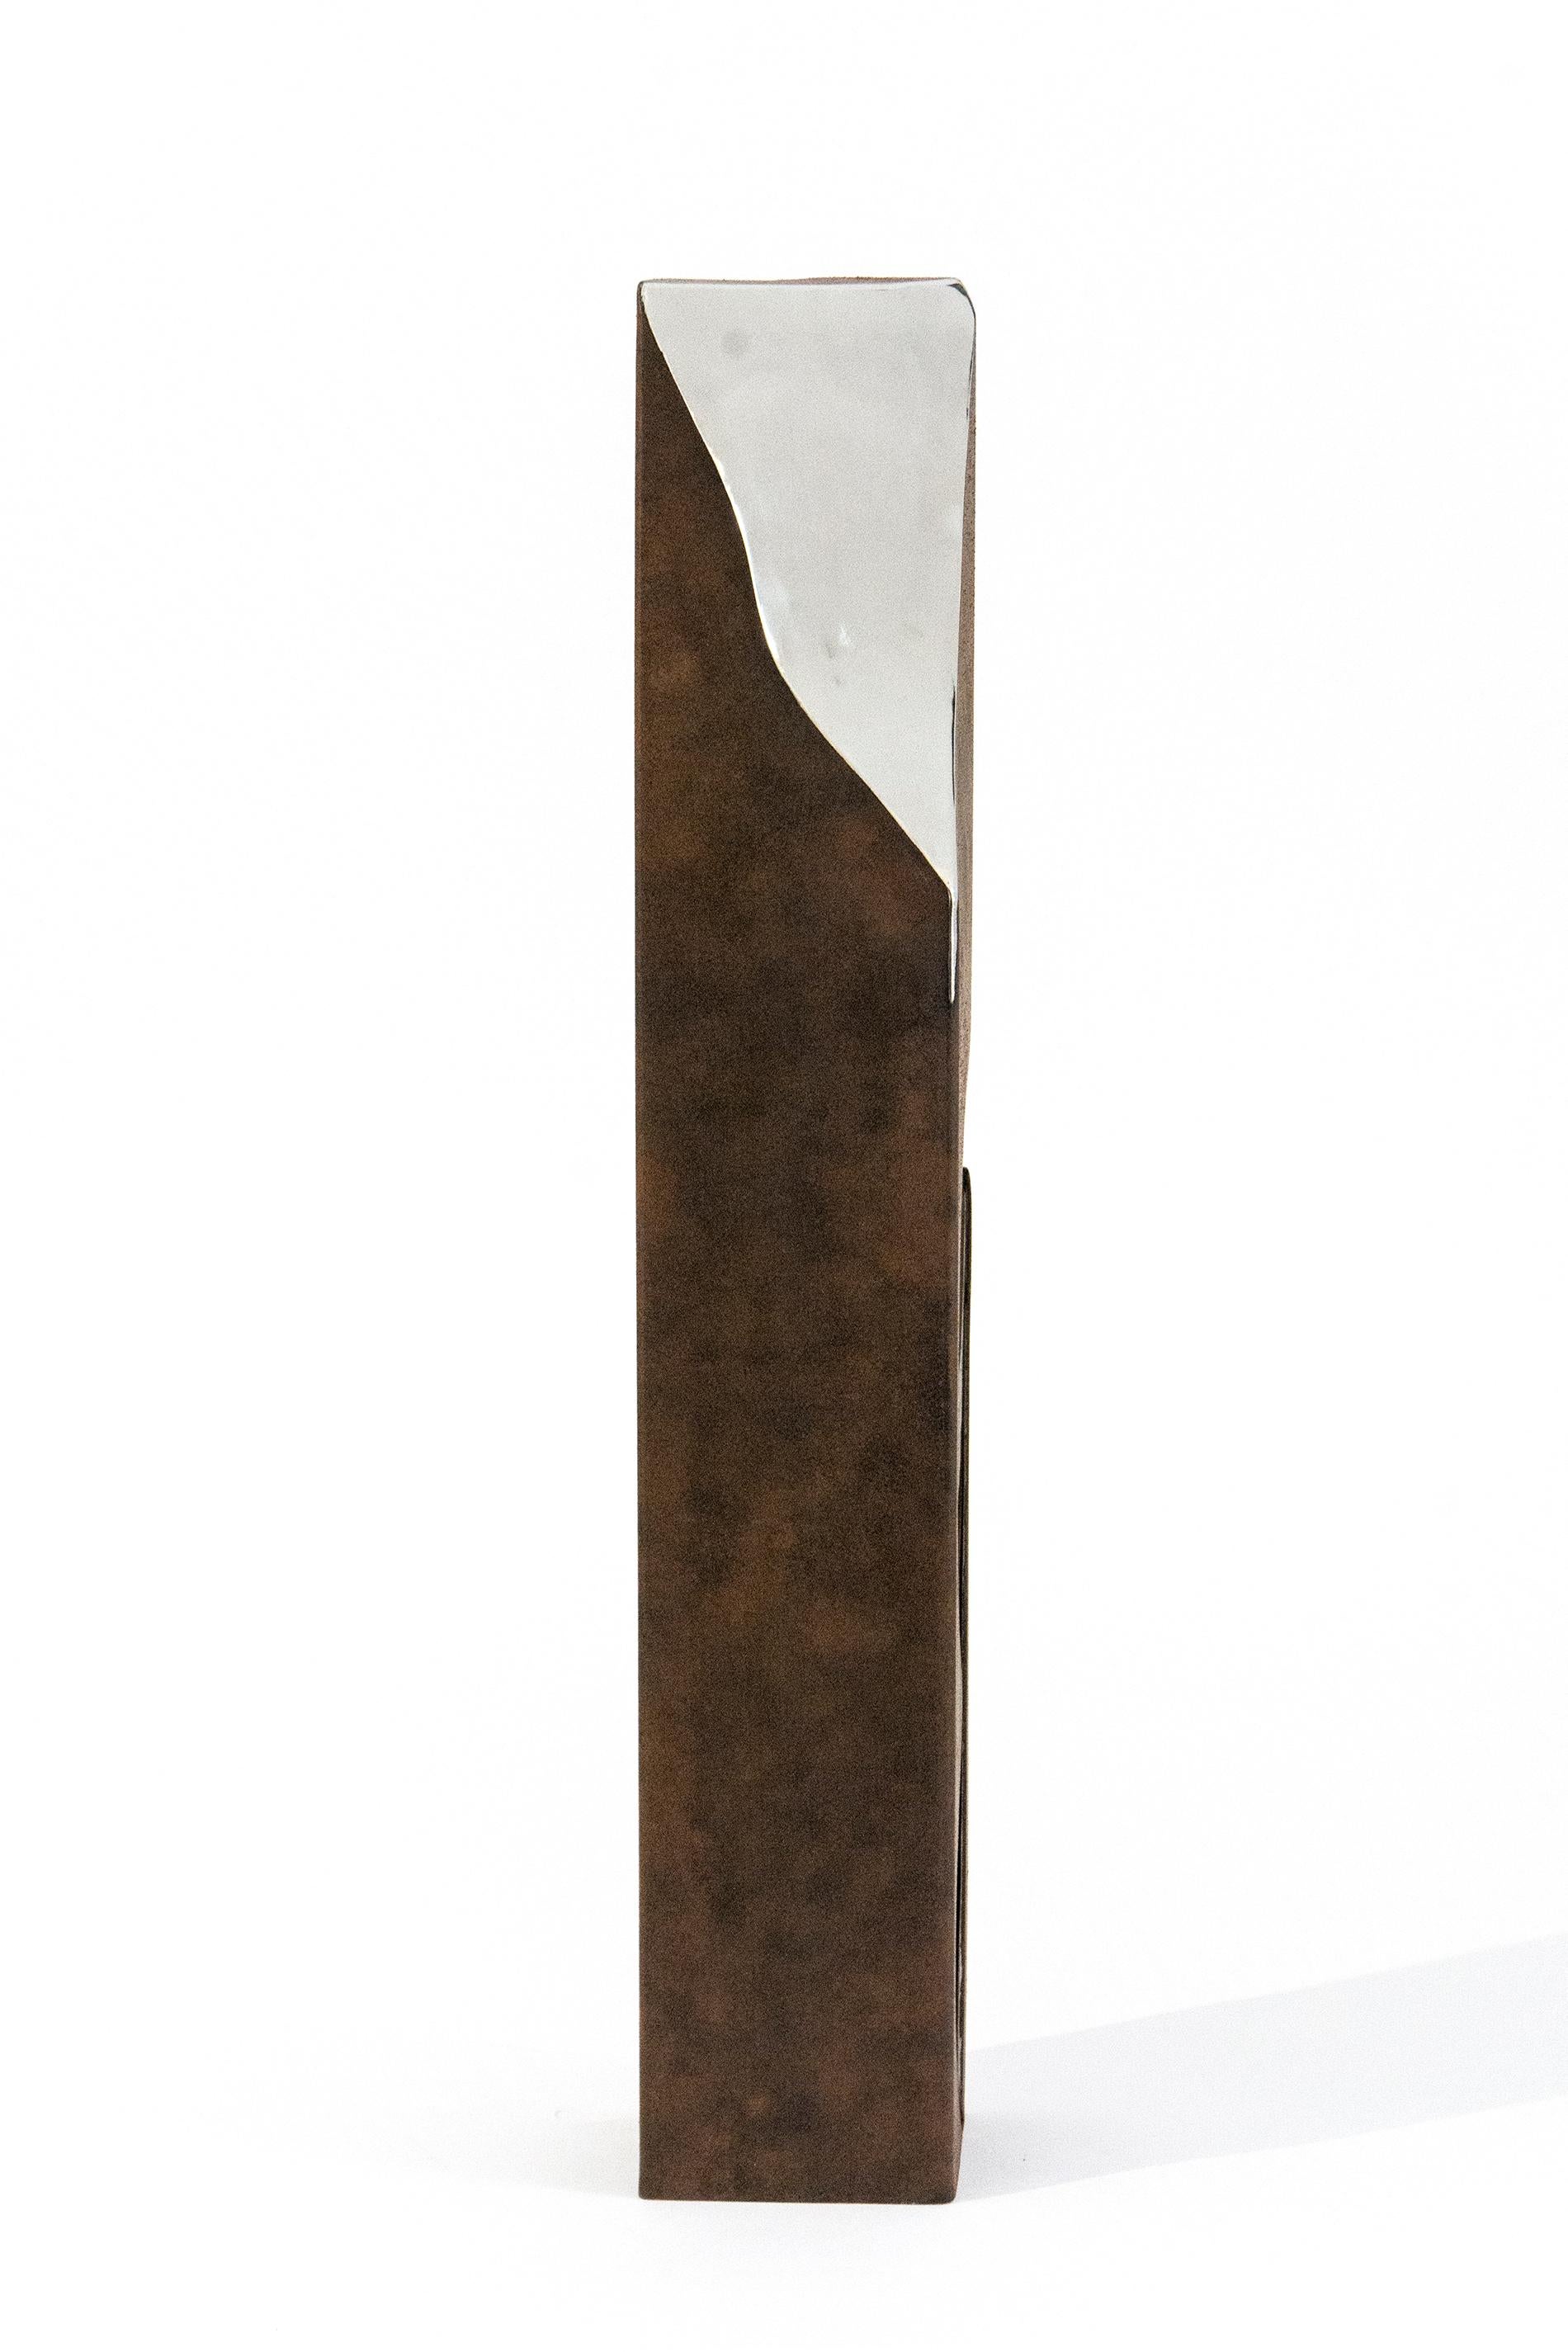 Philippe Pallafray Abstract Sculpture - Athabasca Rust 1/10 - tall, modern, geometric, contemporary, steel sculpture